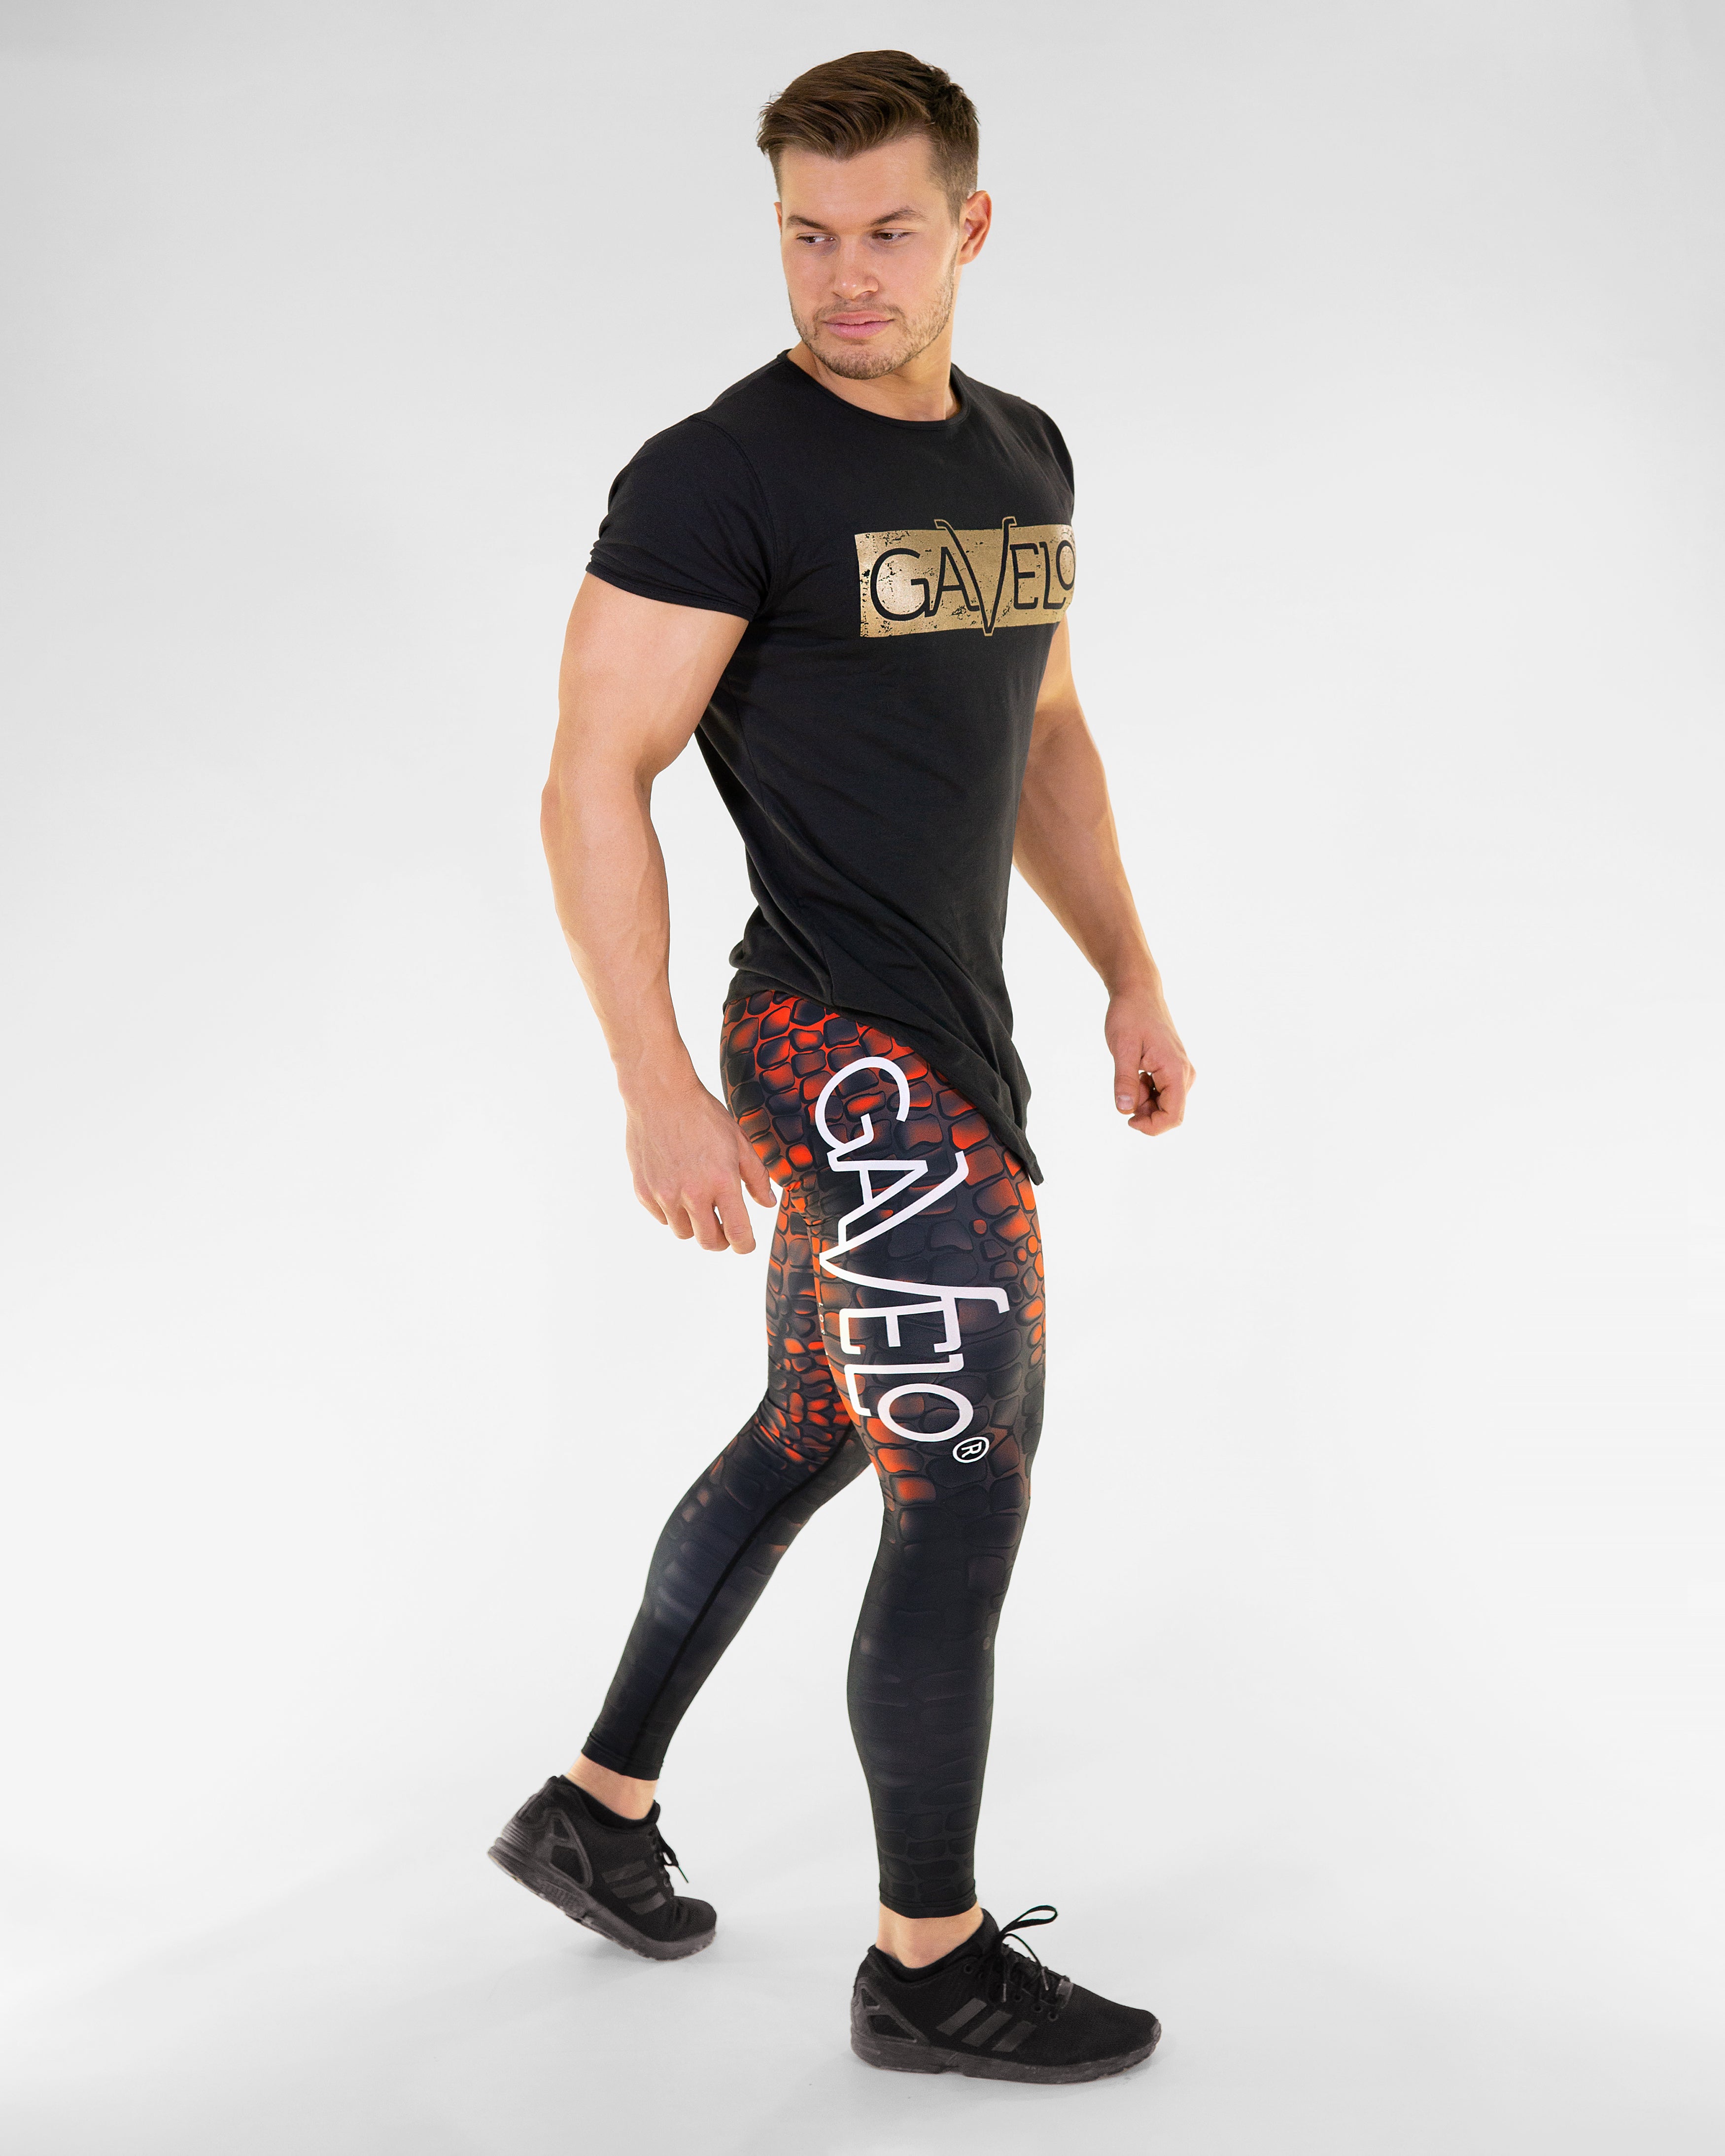 GAVELO Marvellizzard Red Compression Tights